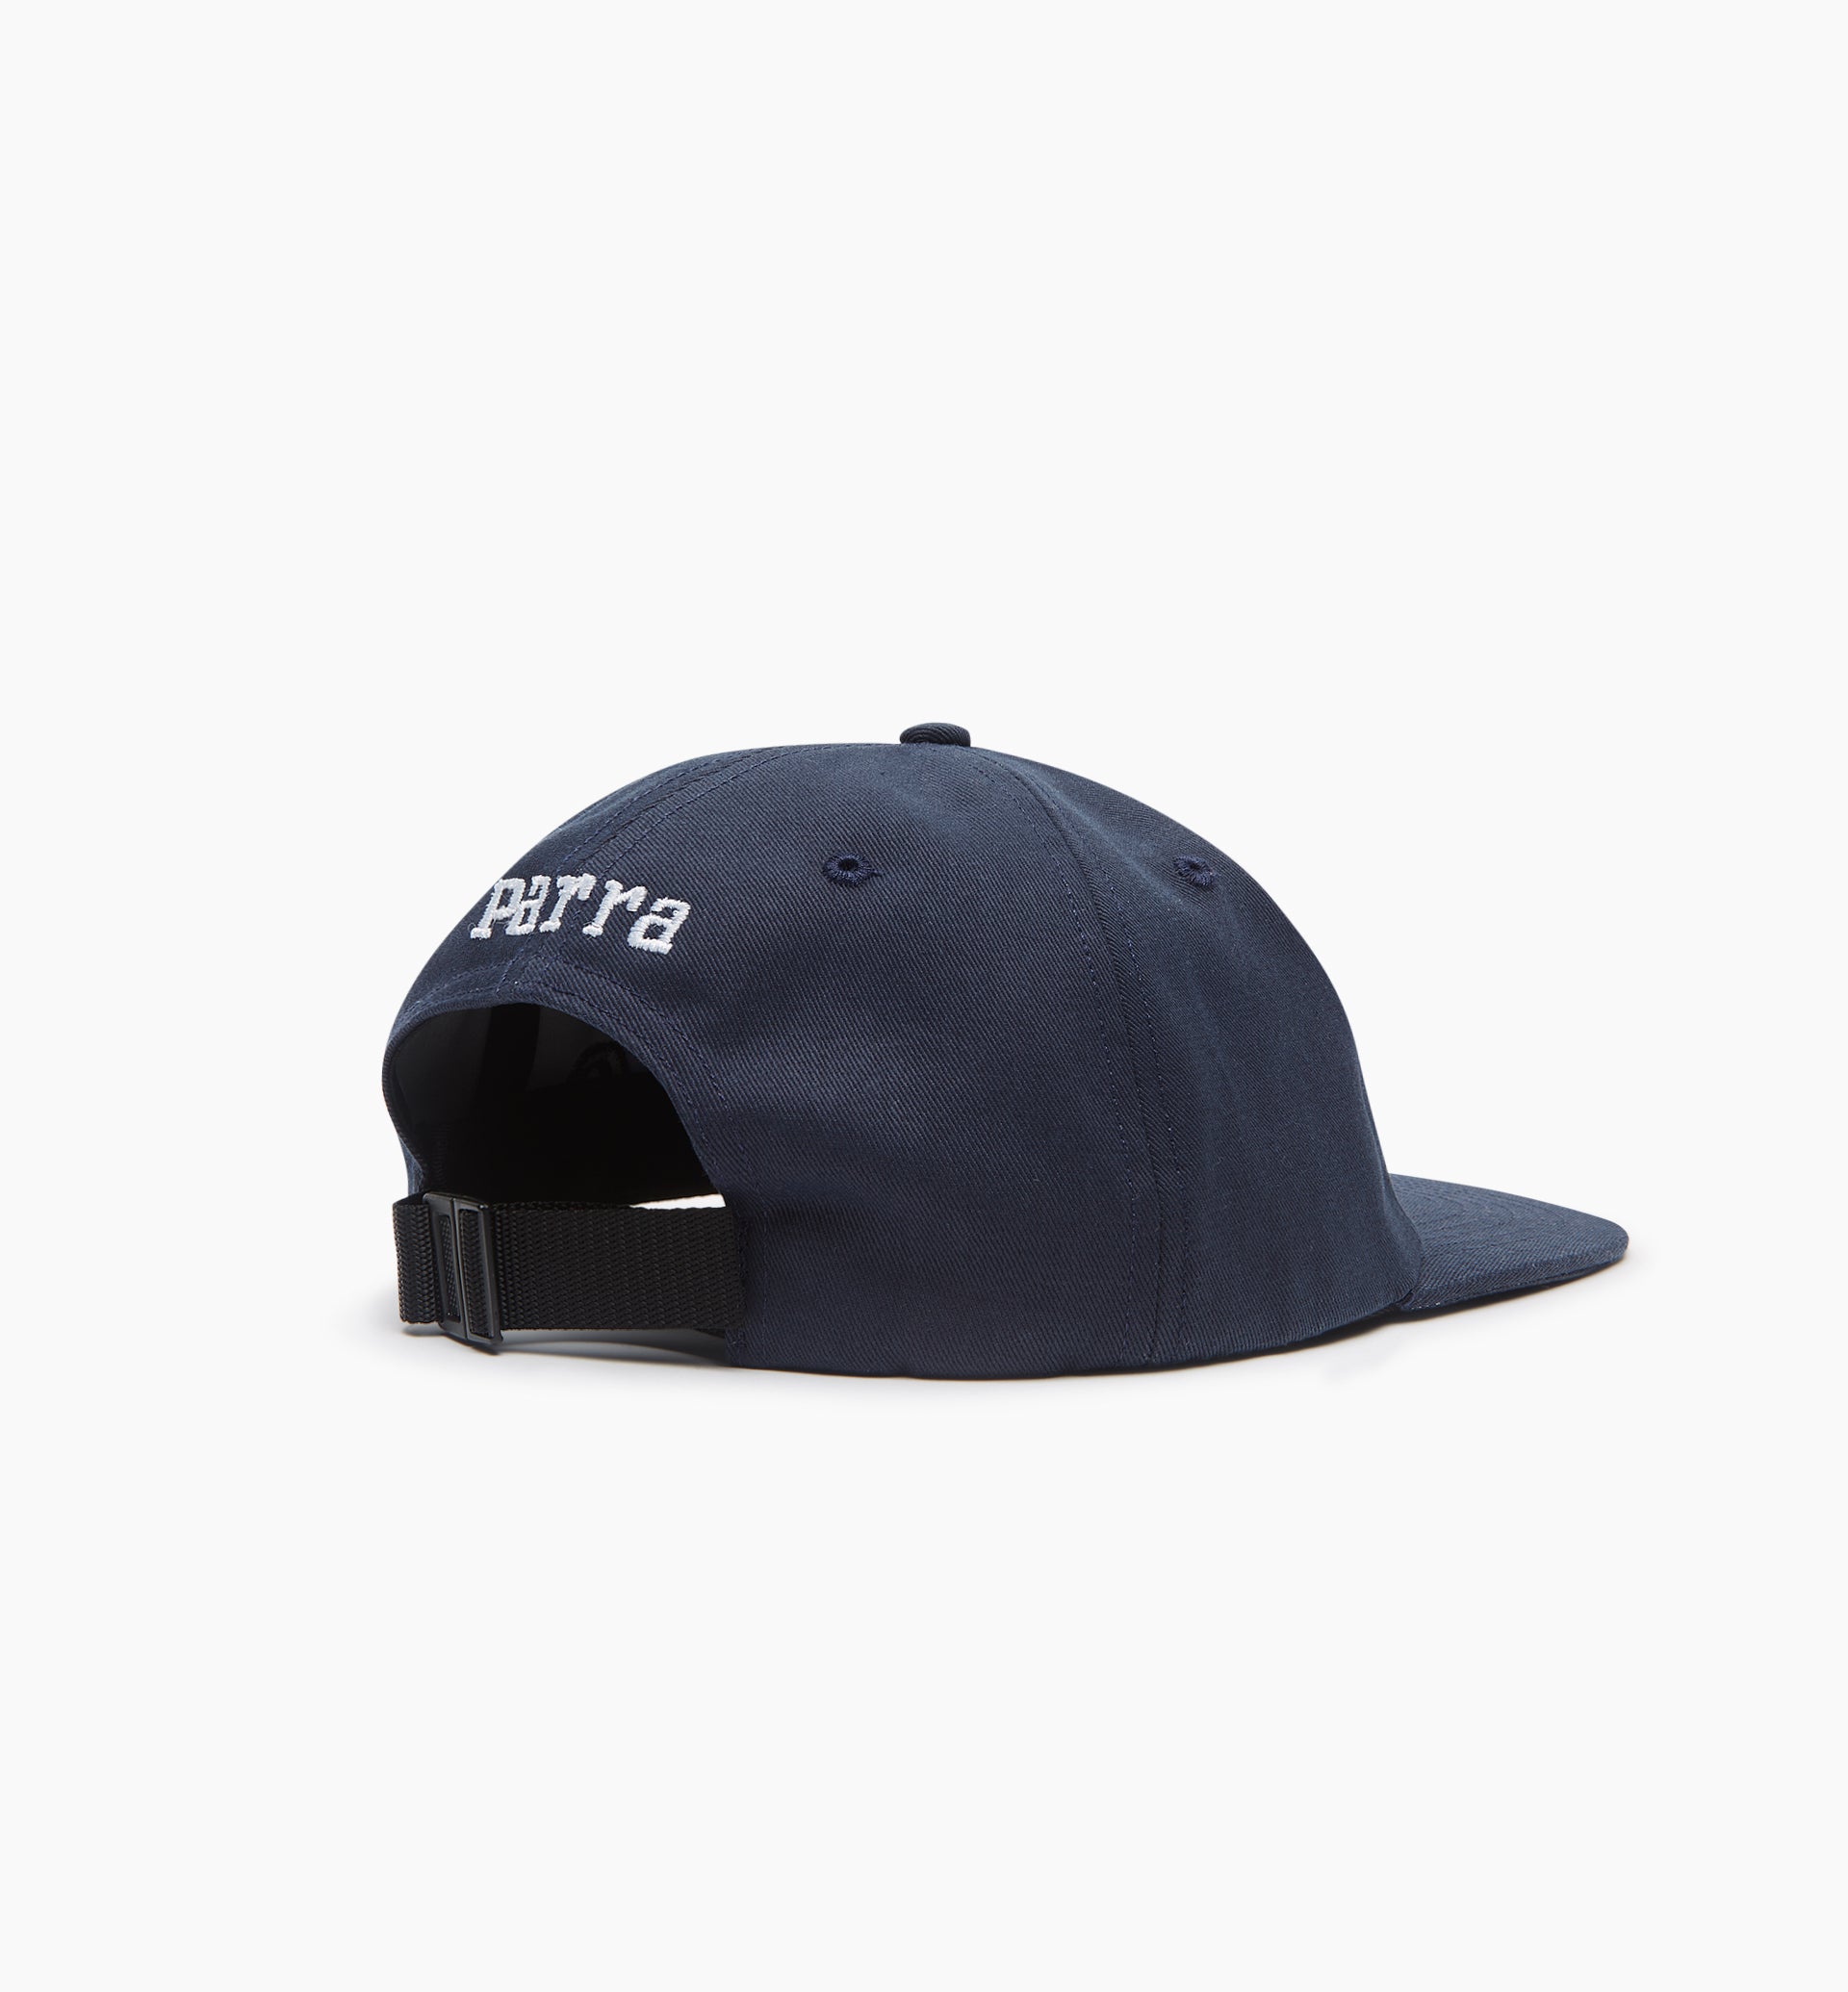 by Parra Racing Team 6 Panel 'Navy Blue'